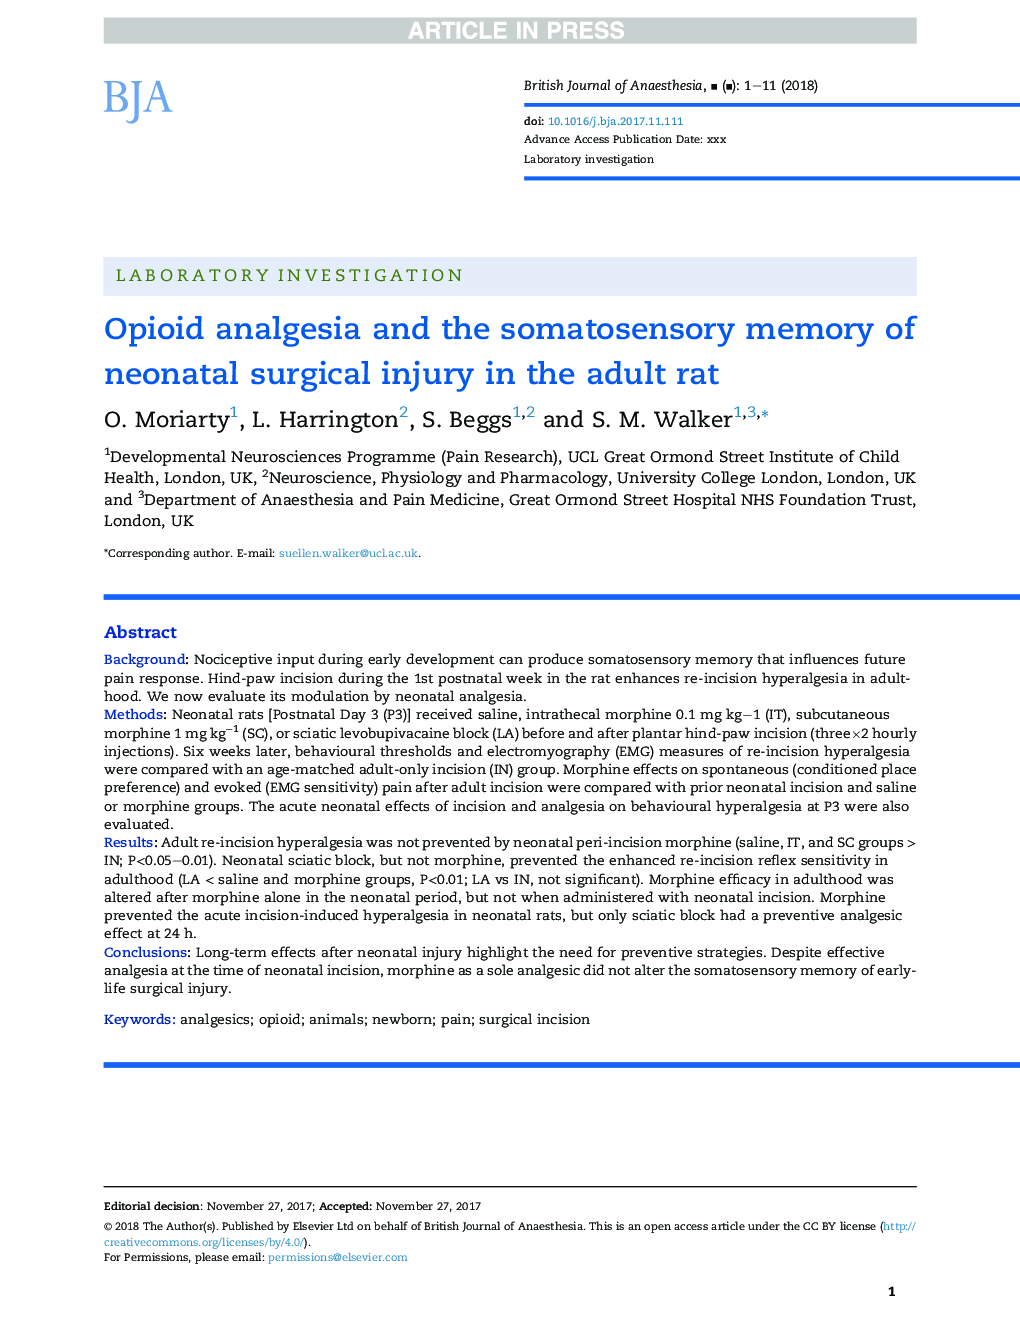 Opioid analgesia and the somatosensory memory of neonatal surgical injury in the adult rat